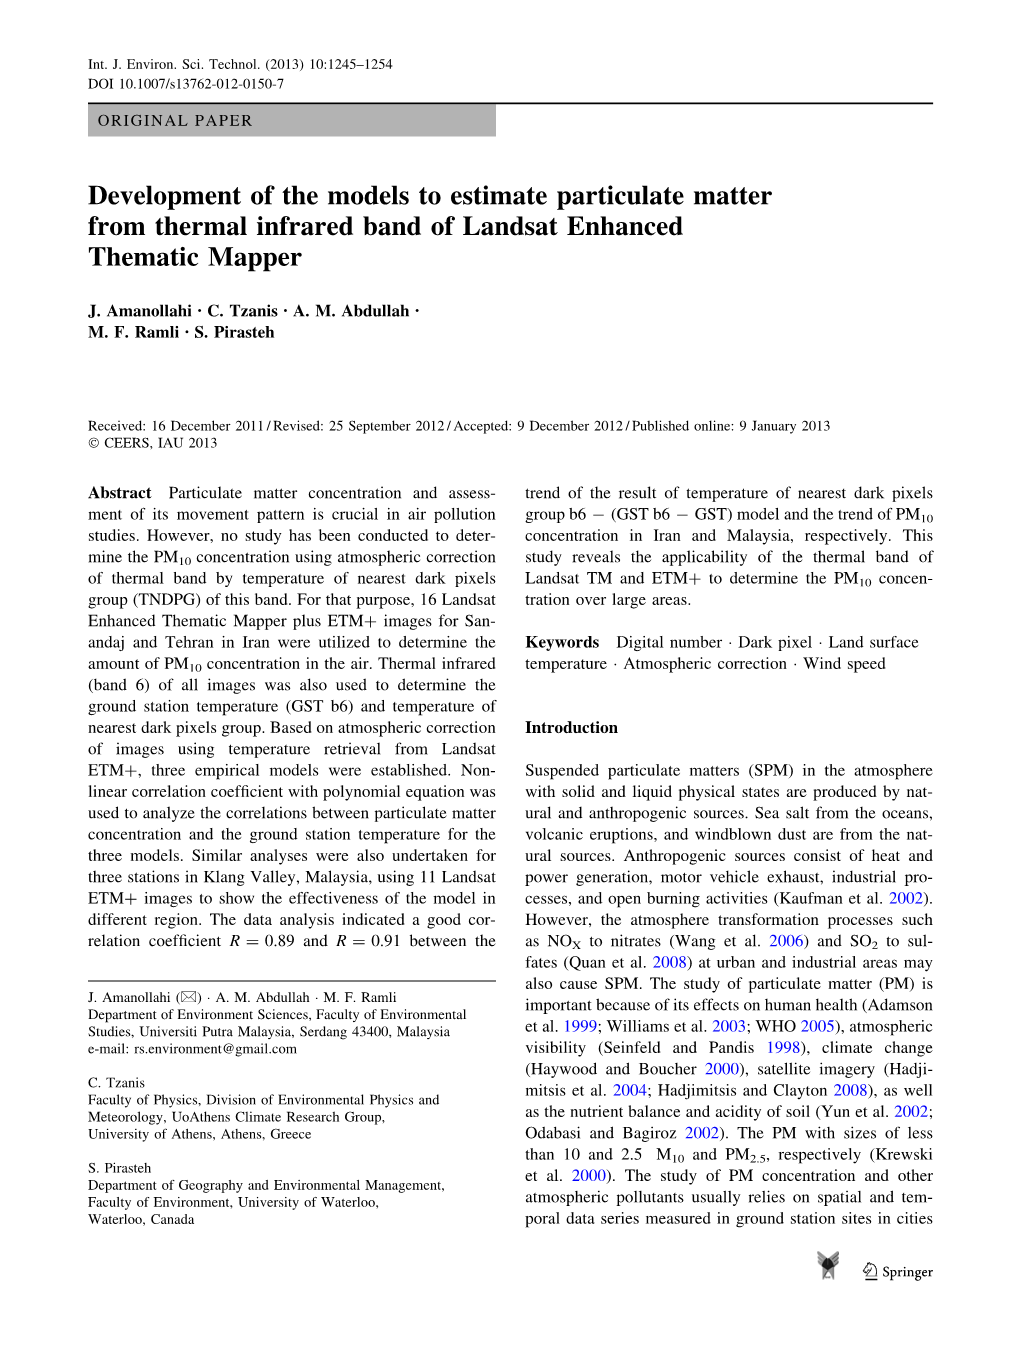 Development of the Models to Estimate Particulate Matter from Thermal Infrared Band of Landsat Enhanced Thematic Mapper